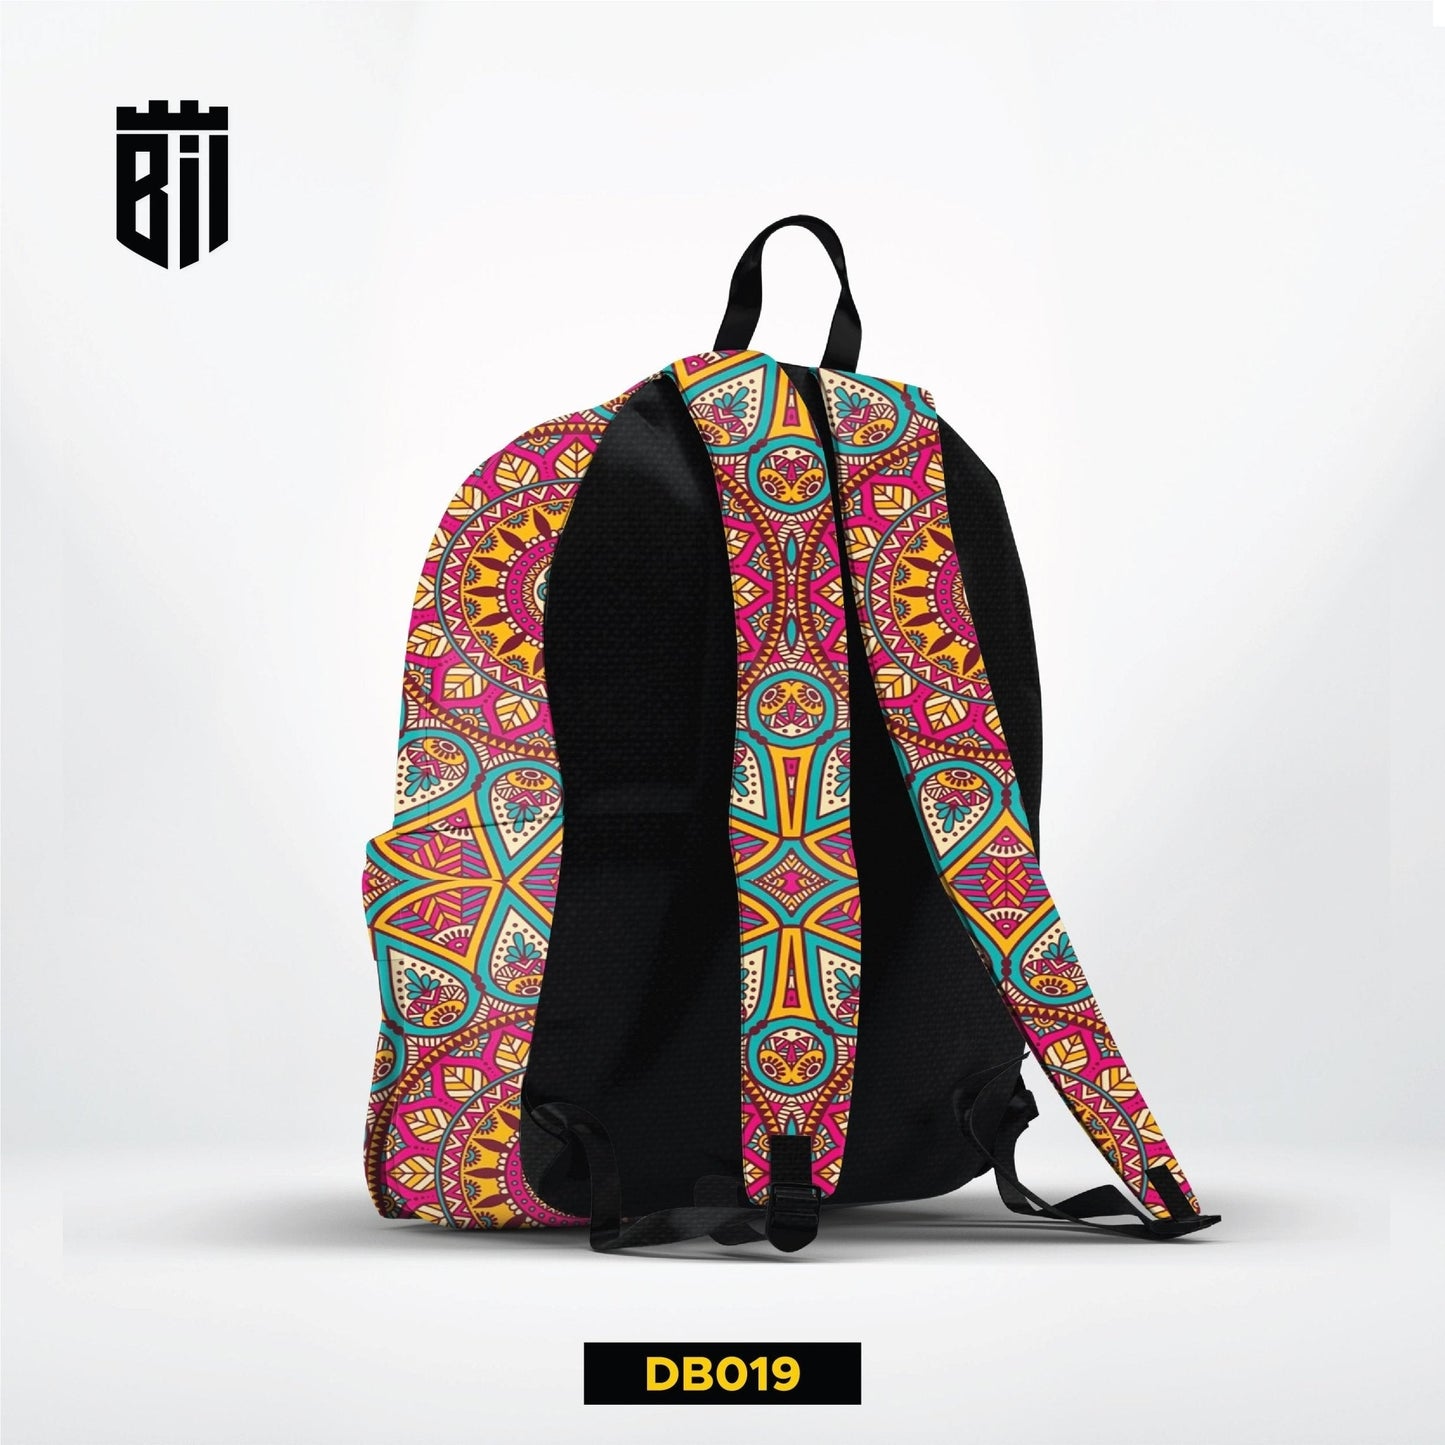 DB019 Colorful Mandala Camouflage Allover Printed Backpack - BREACHIT